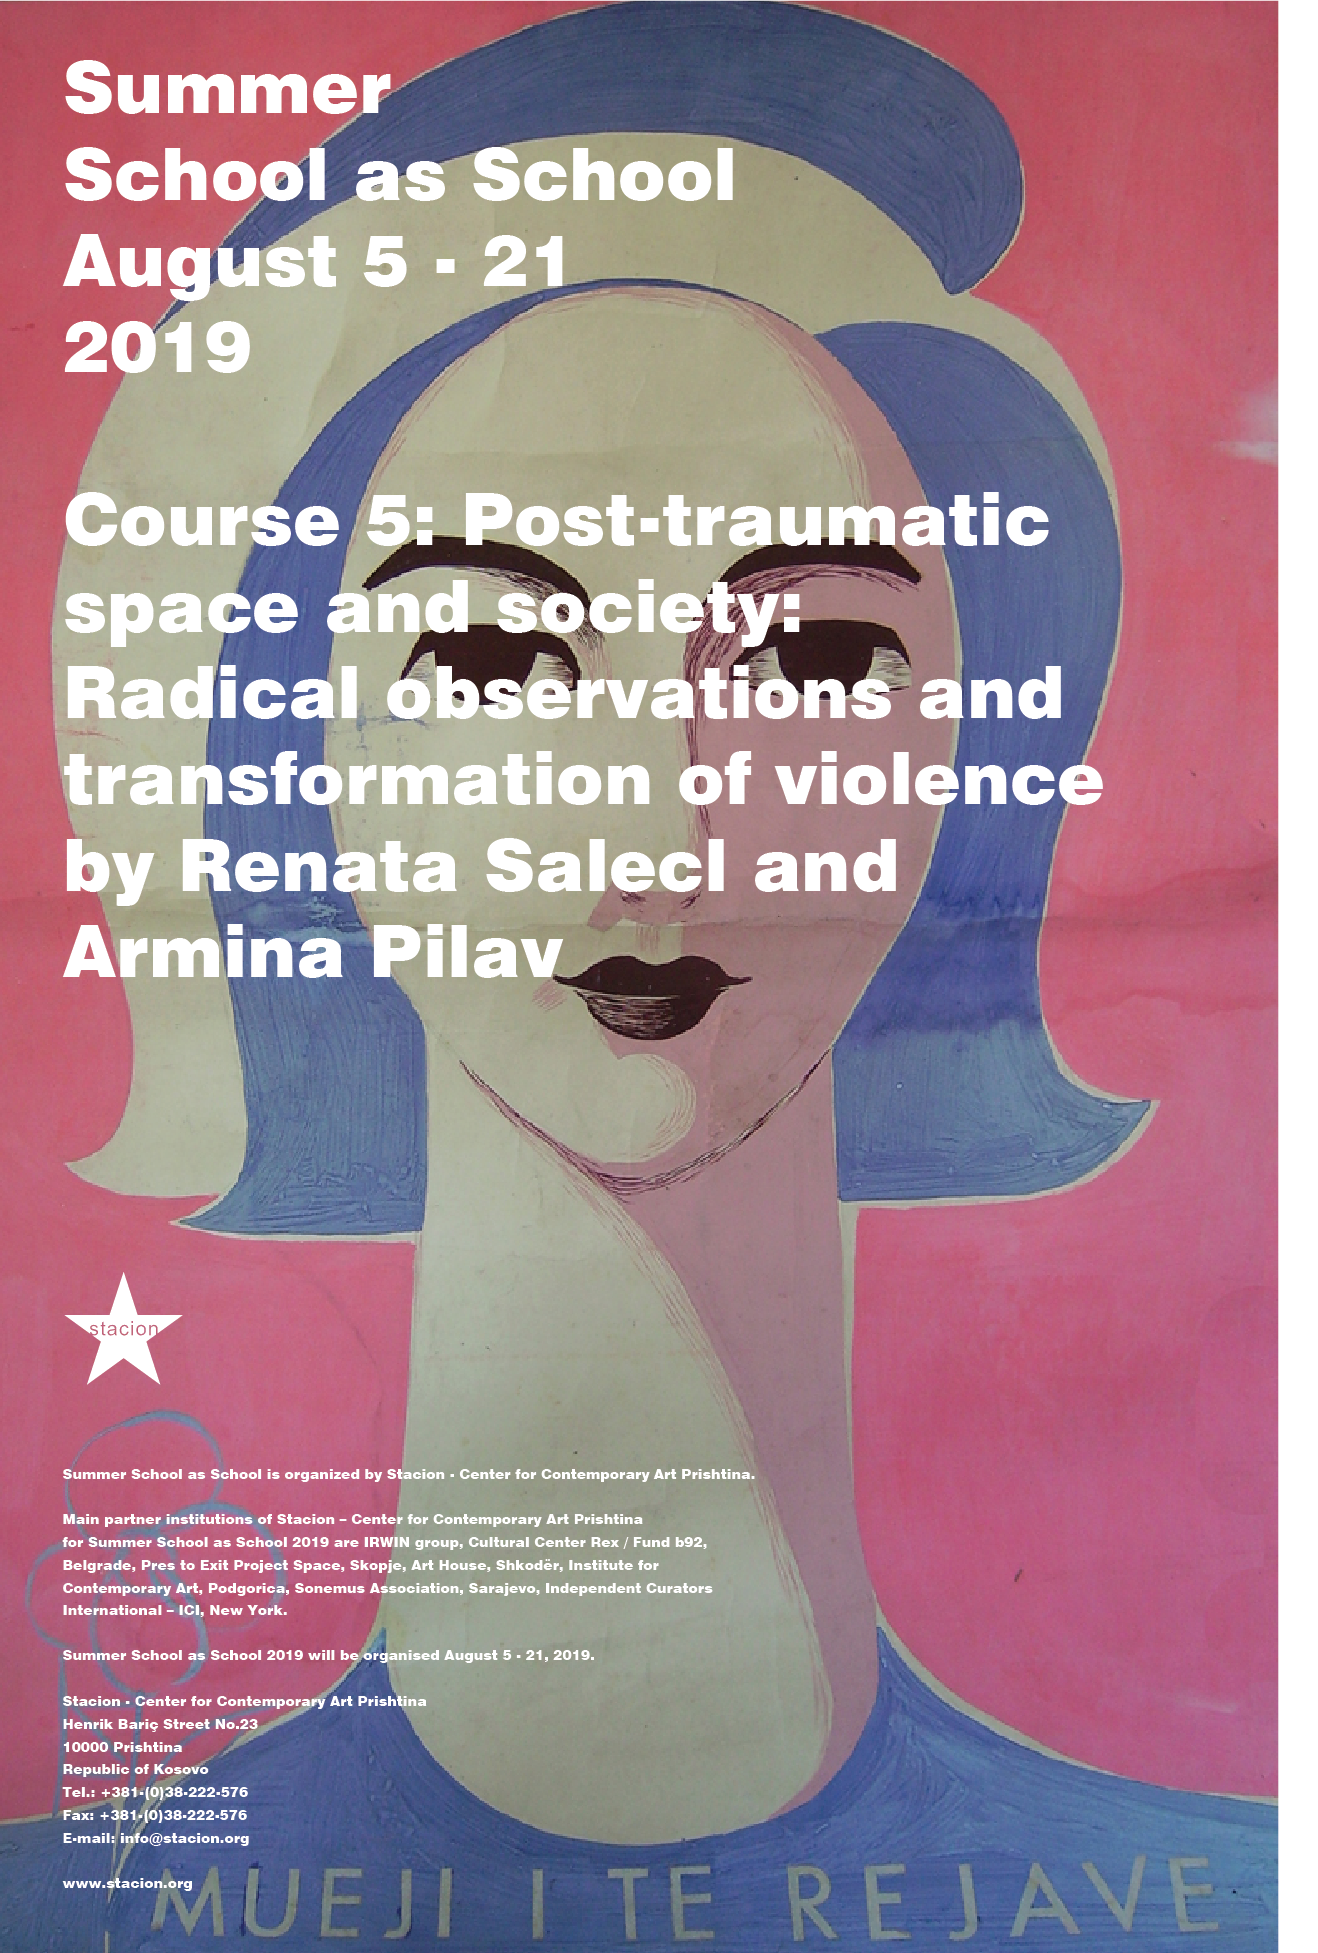 Course 5: Post-traumatic Space and Society: Radical observations and transformation of violence